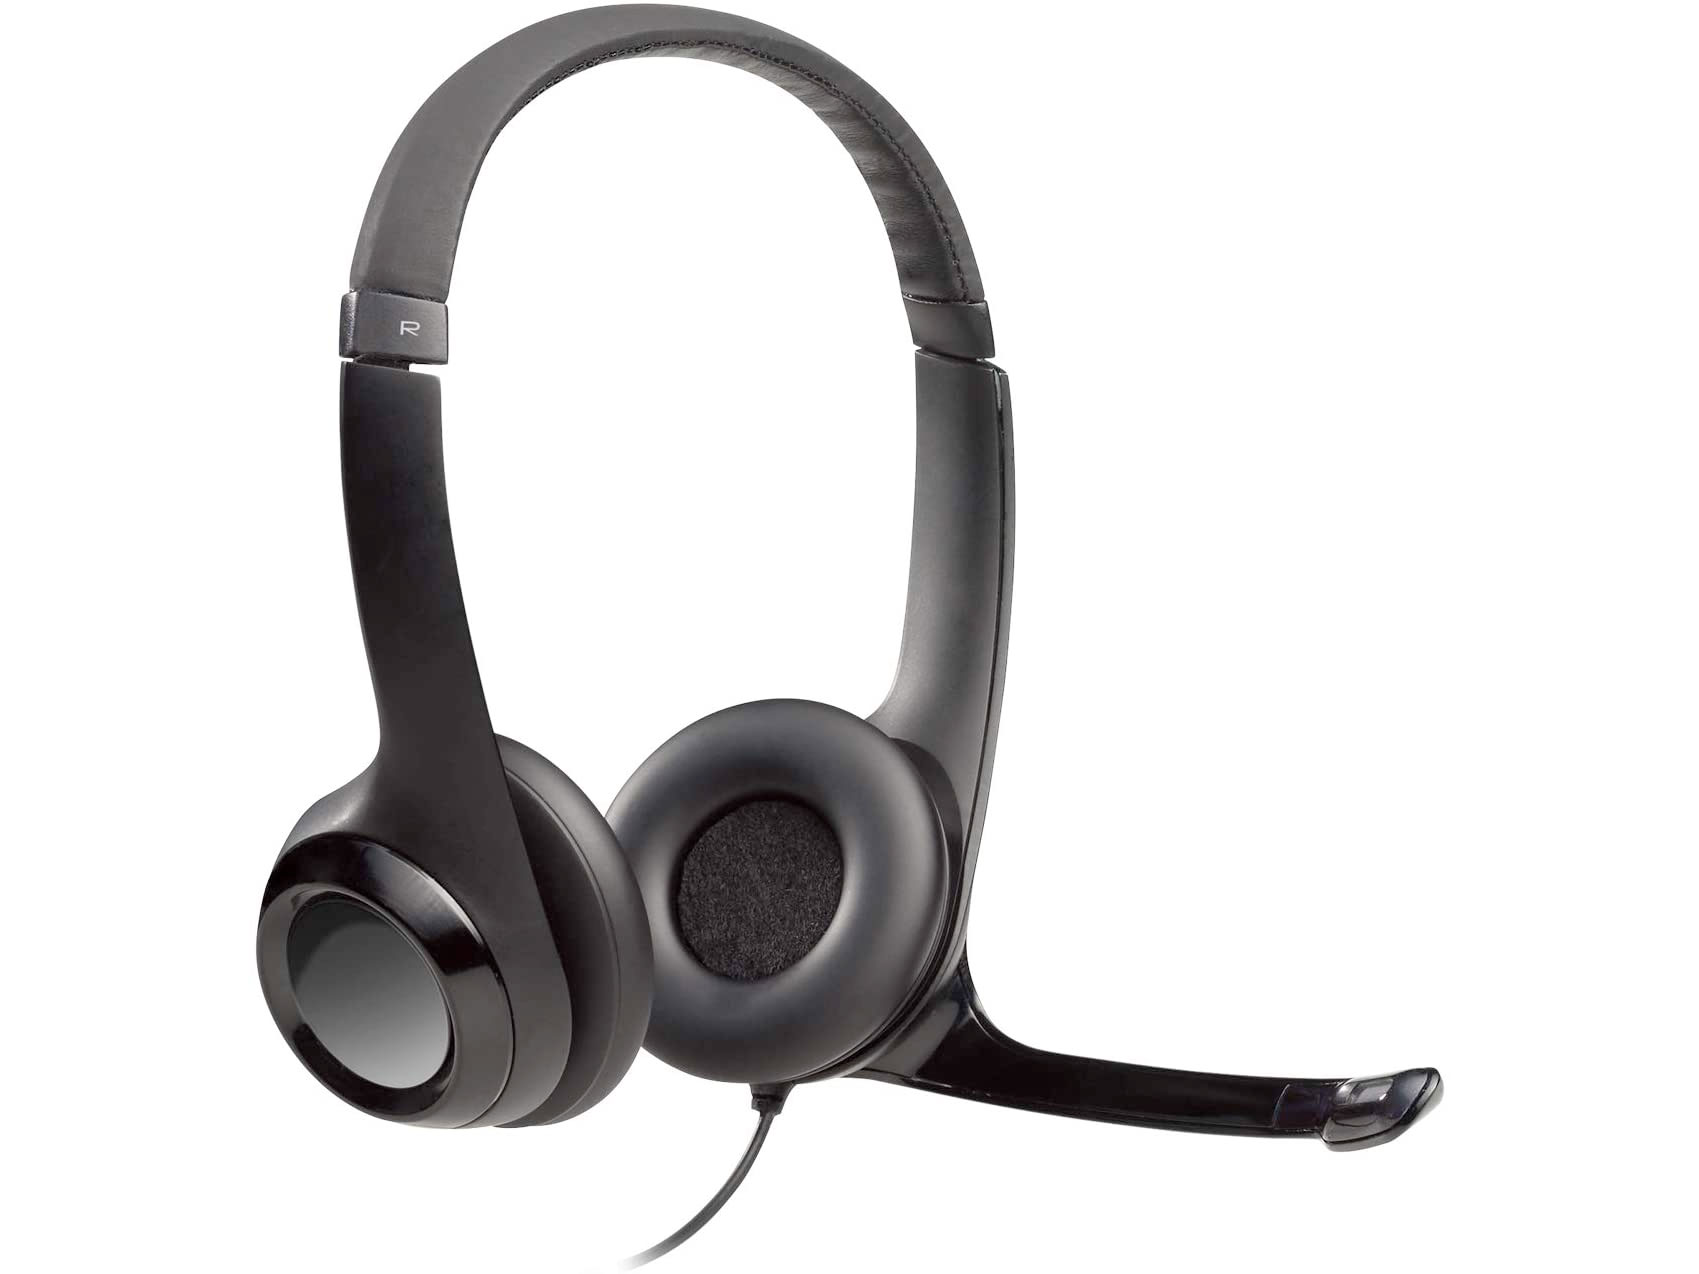 Amazon：Logitech USB Headset H390 with Noise Cancelling Mic只卖$24.99